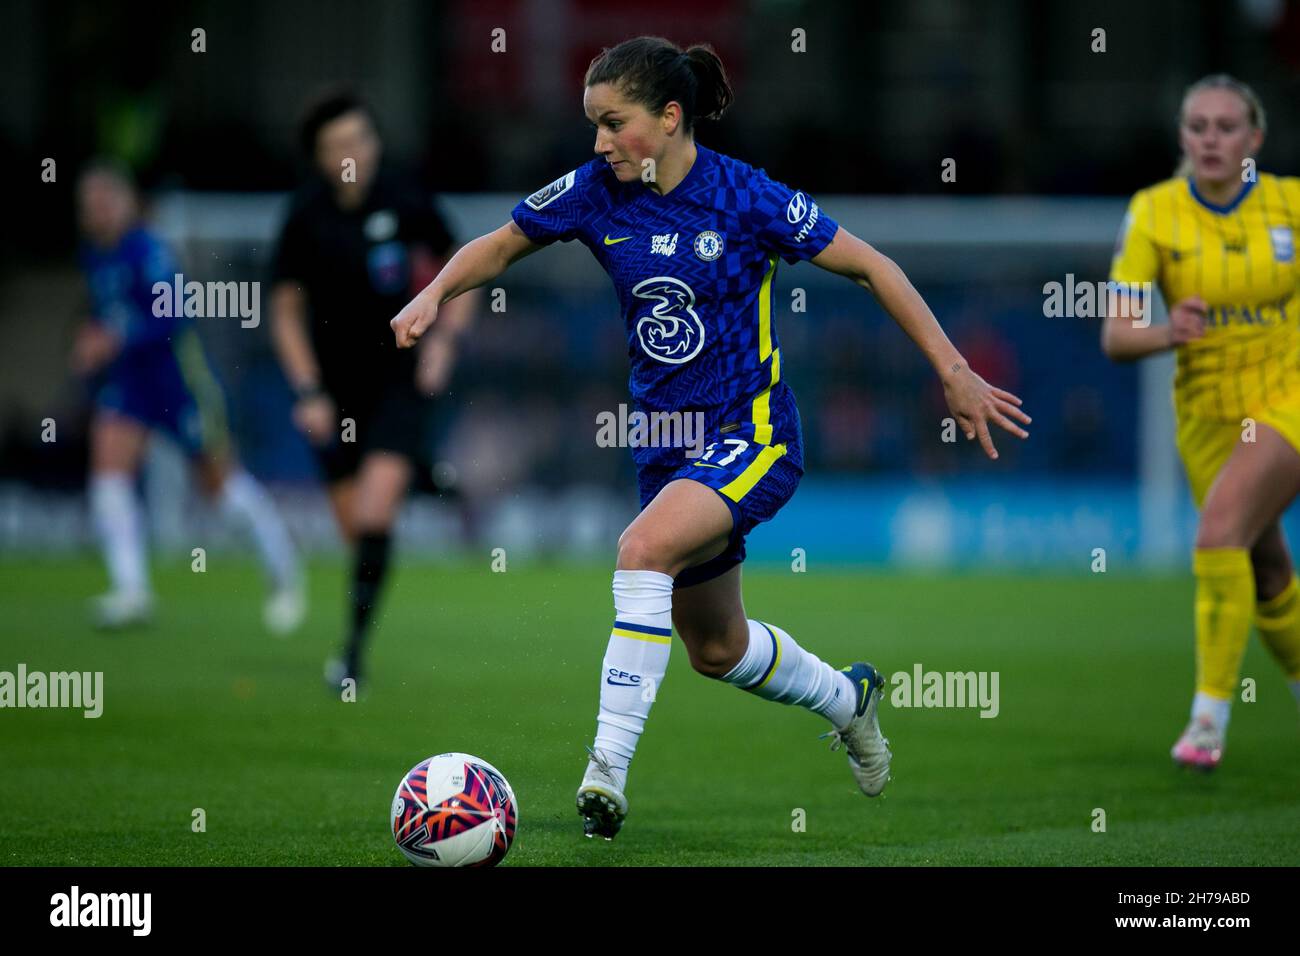 London, UK. 21st Nov, 2021. LONDON, UK. NOVEMBER 21ST : Jessie Fleming of Chelsea FC controls the ball during the 2021-22 FA Womens Superleague fixture between Chelsea FC and Birmingham City at Kingsmeadow. Credit: Federico Guerra Morán/Alamy Live News Stock Photo